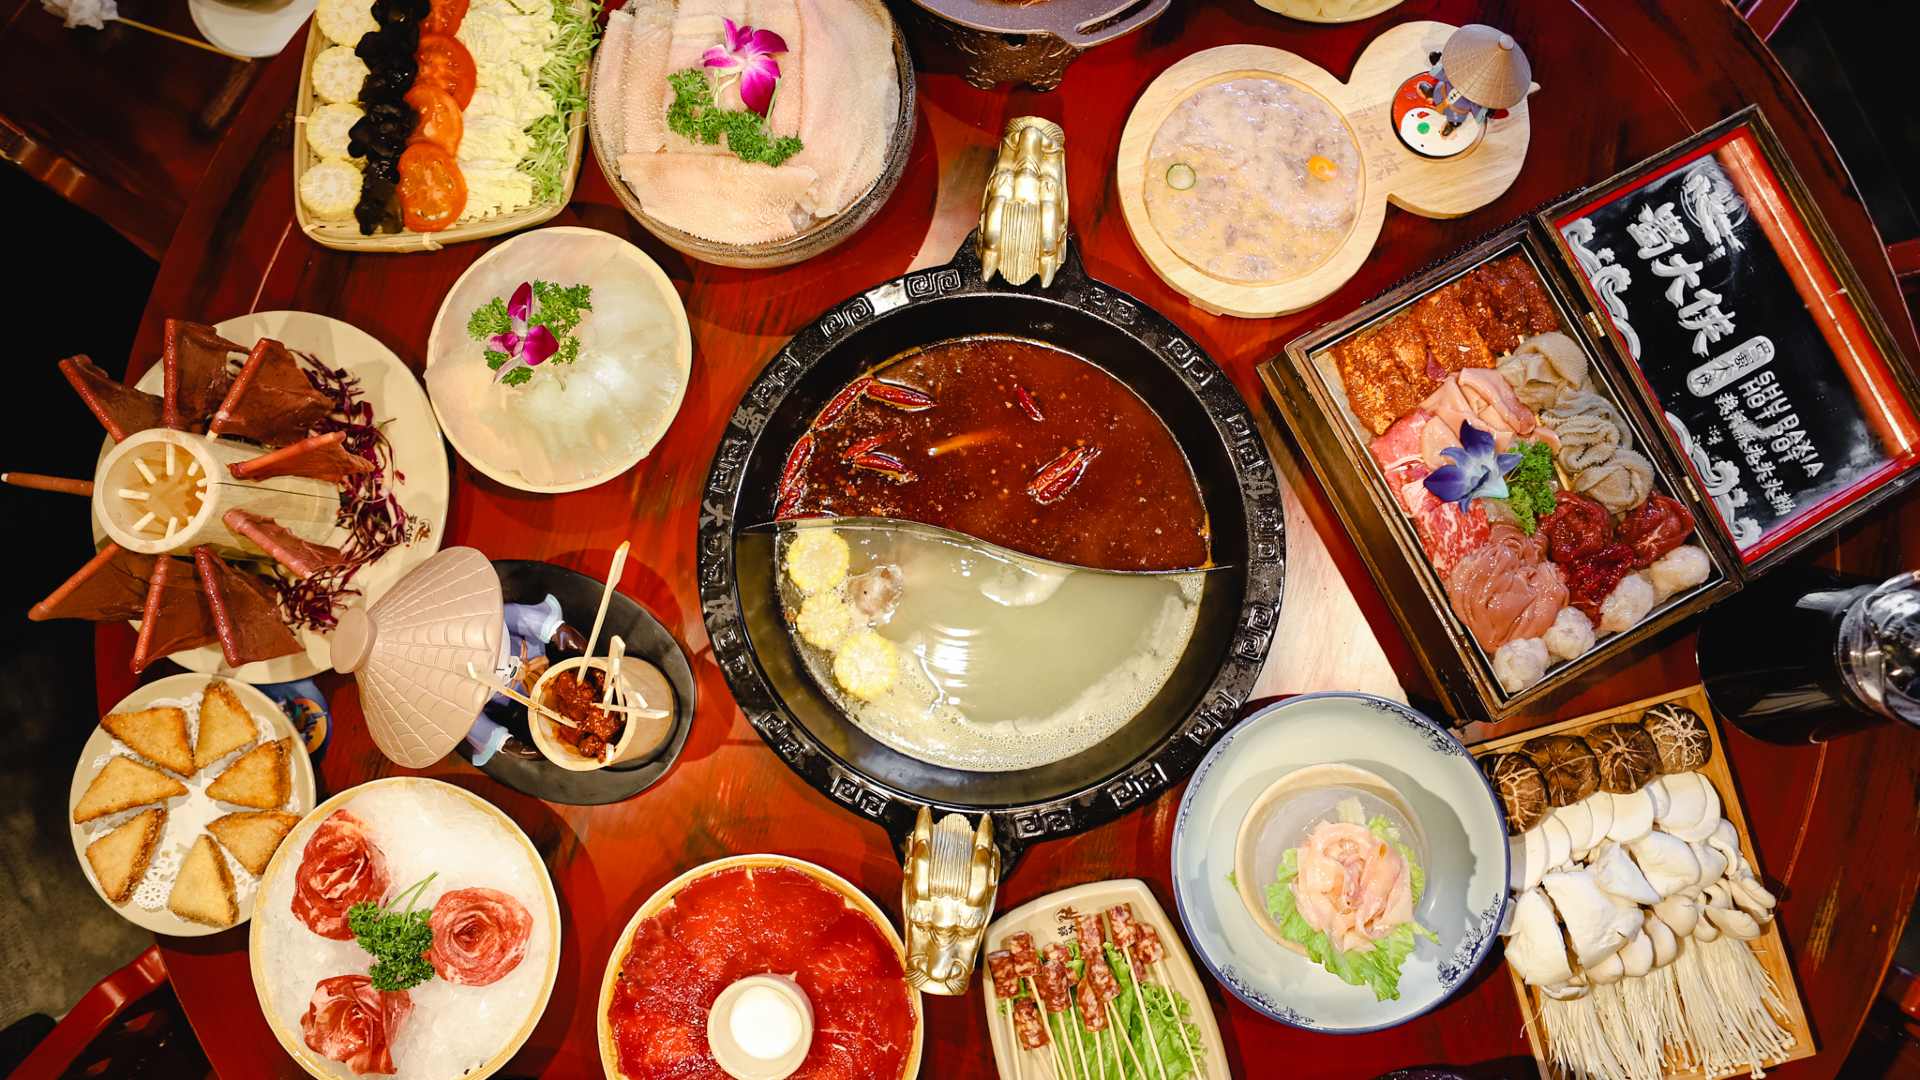 Where to Find the Best Hot Pot in Melbourne